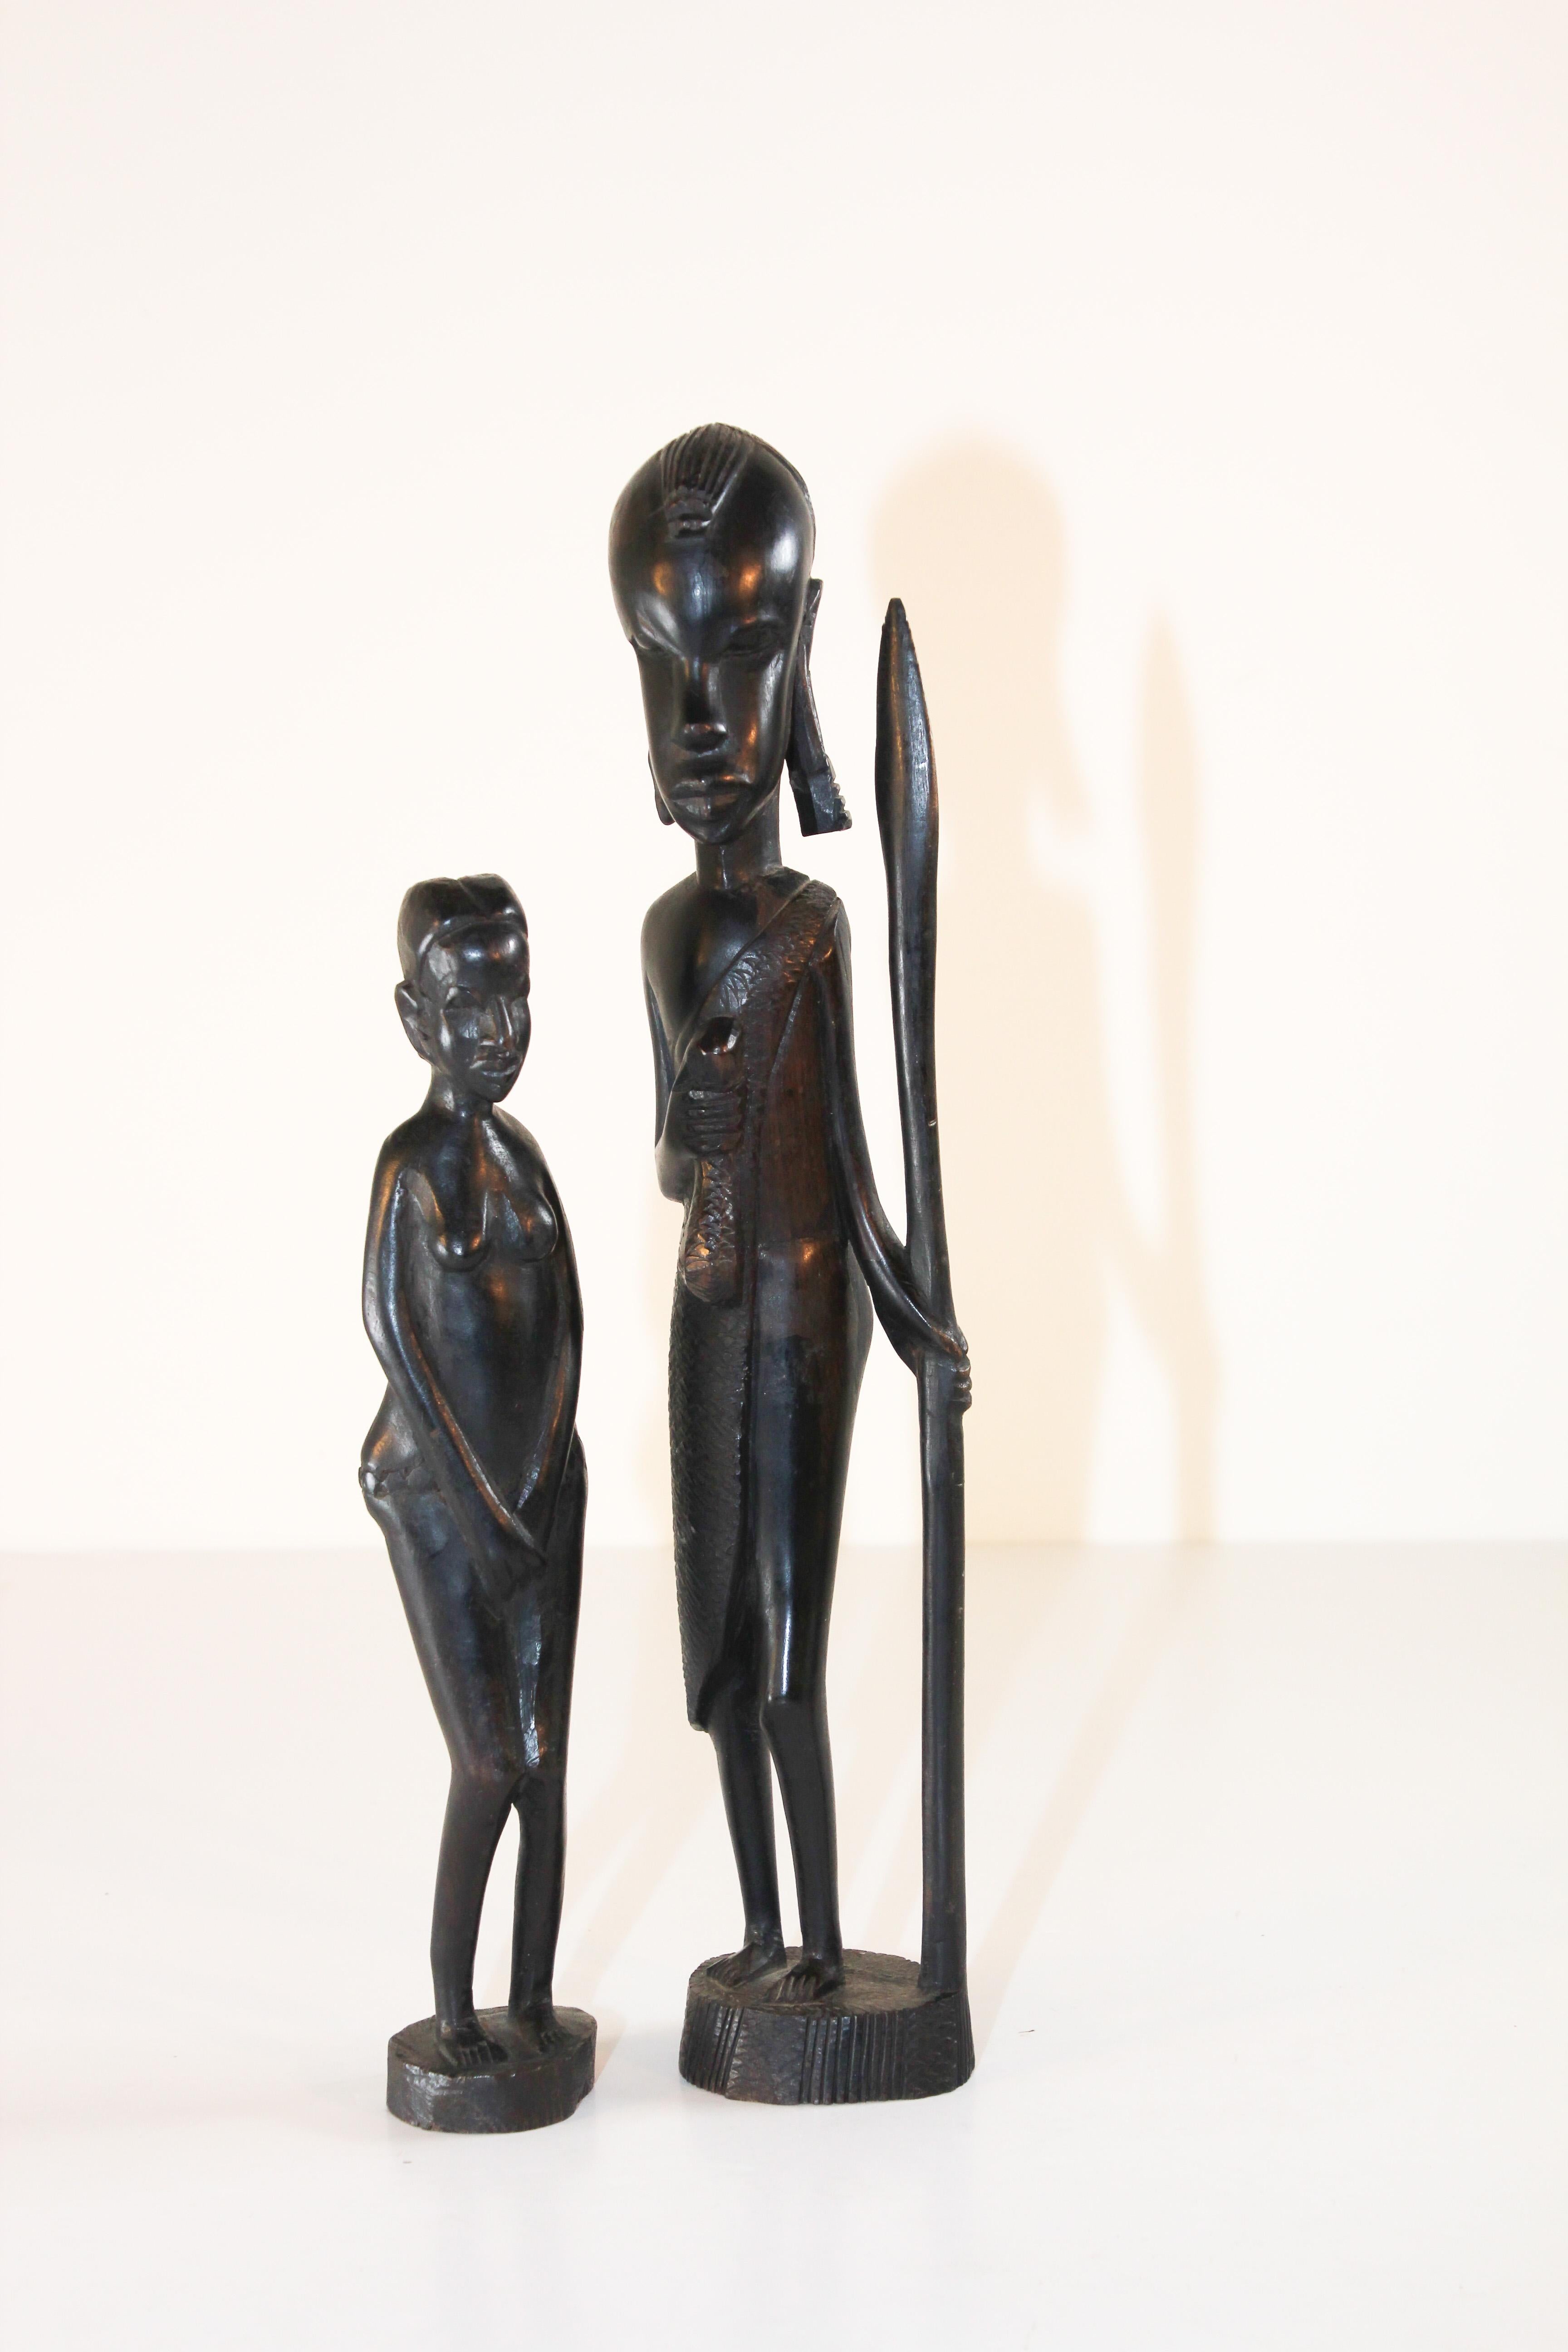 Decorative ebony well hand-carved African statues of two women.
Handmade in Kenya, Africa
Measures: 
1 - 14